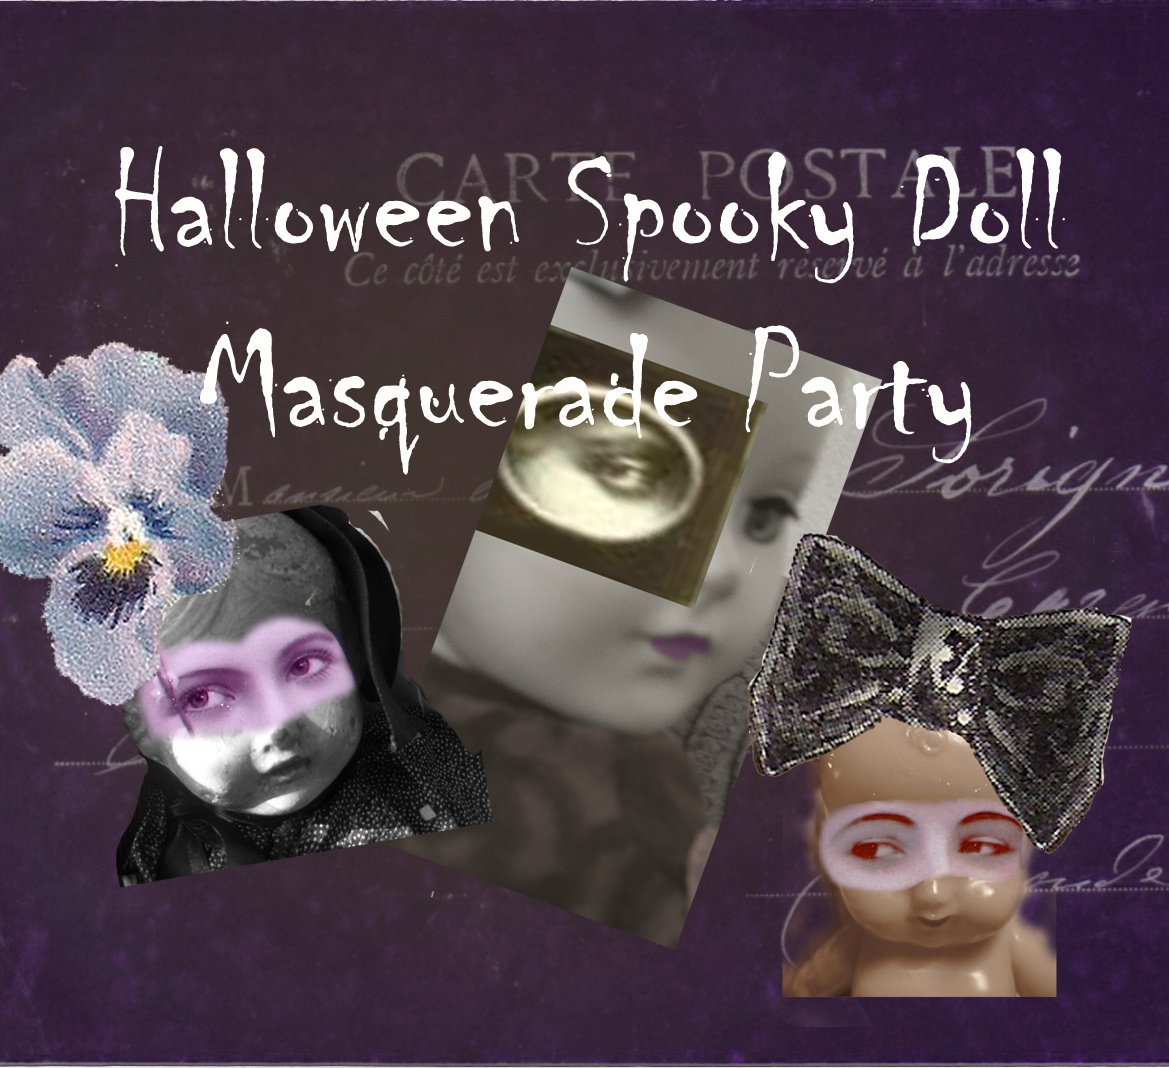 Just renewed: #Halloween Masquerade Spooky Doll Party Digital #Collage Sheet etsy.com/listing/162628… #cutebutspooky